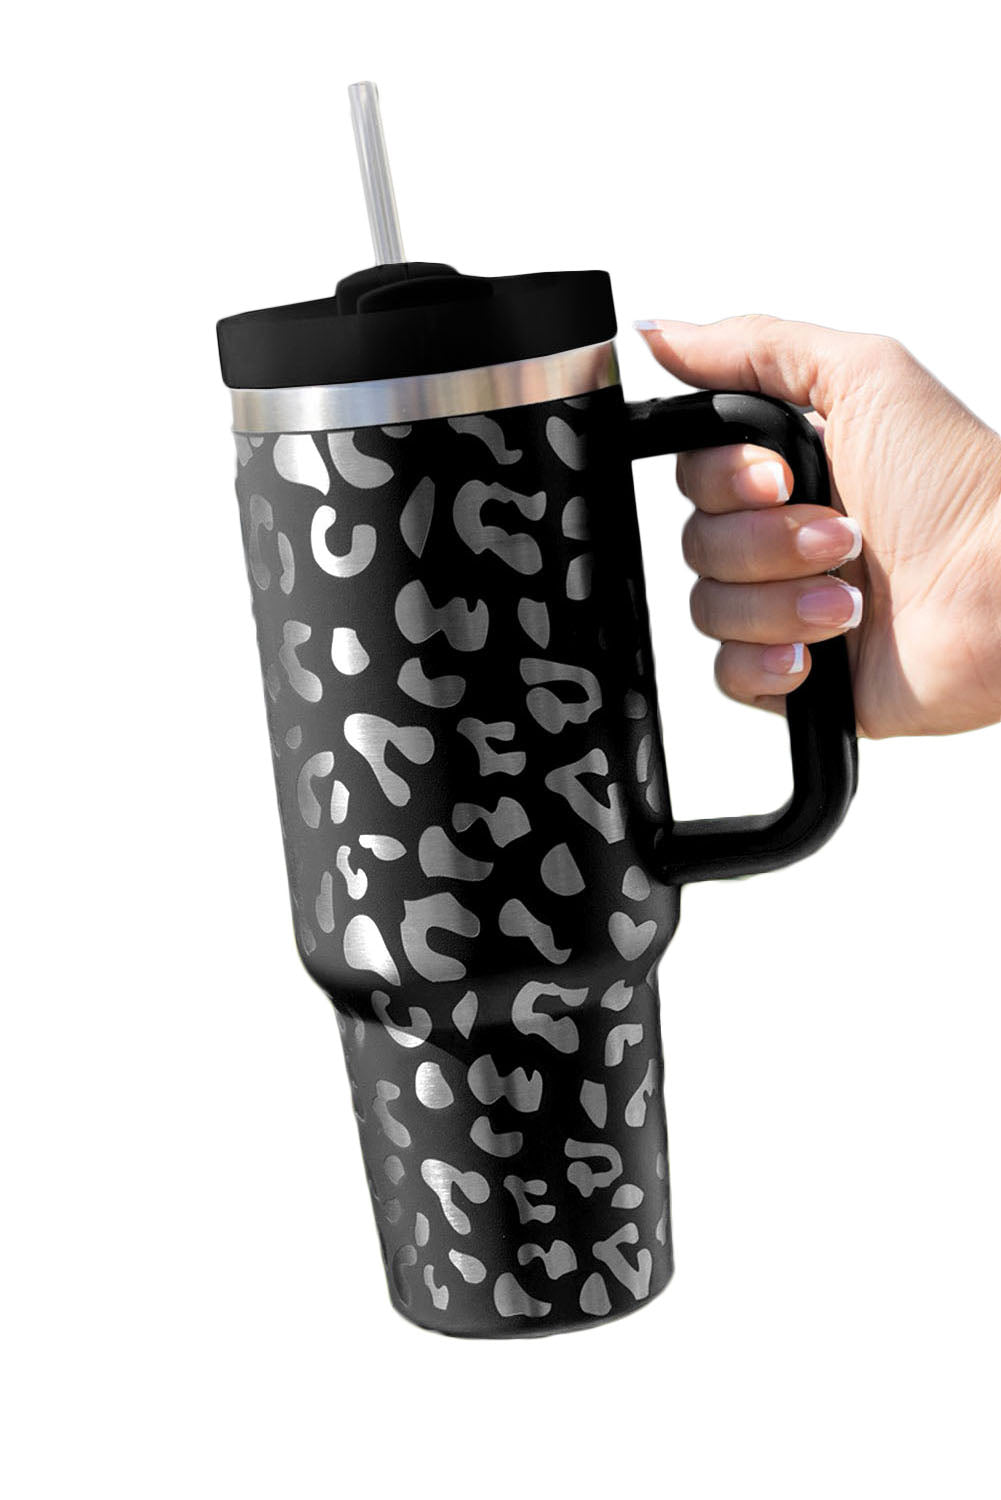 Green 40oz Stainless Steel Portable Leopard Tumbler Mug With Handle